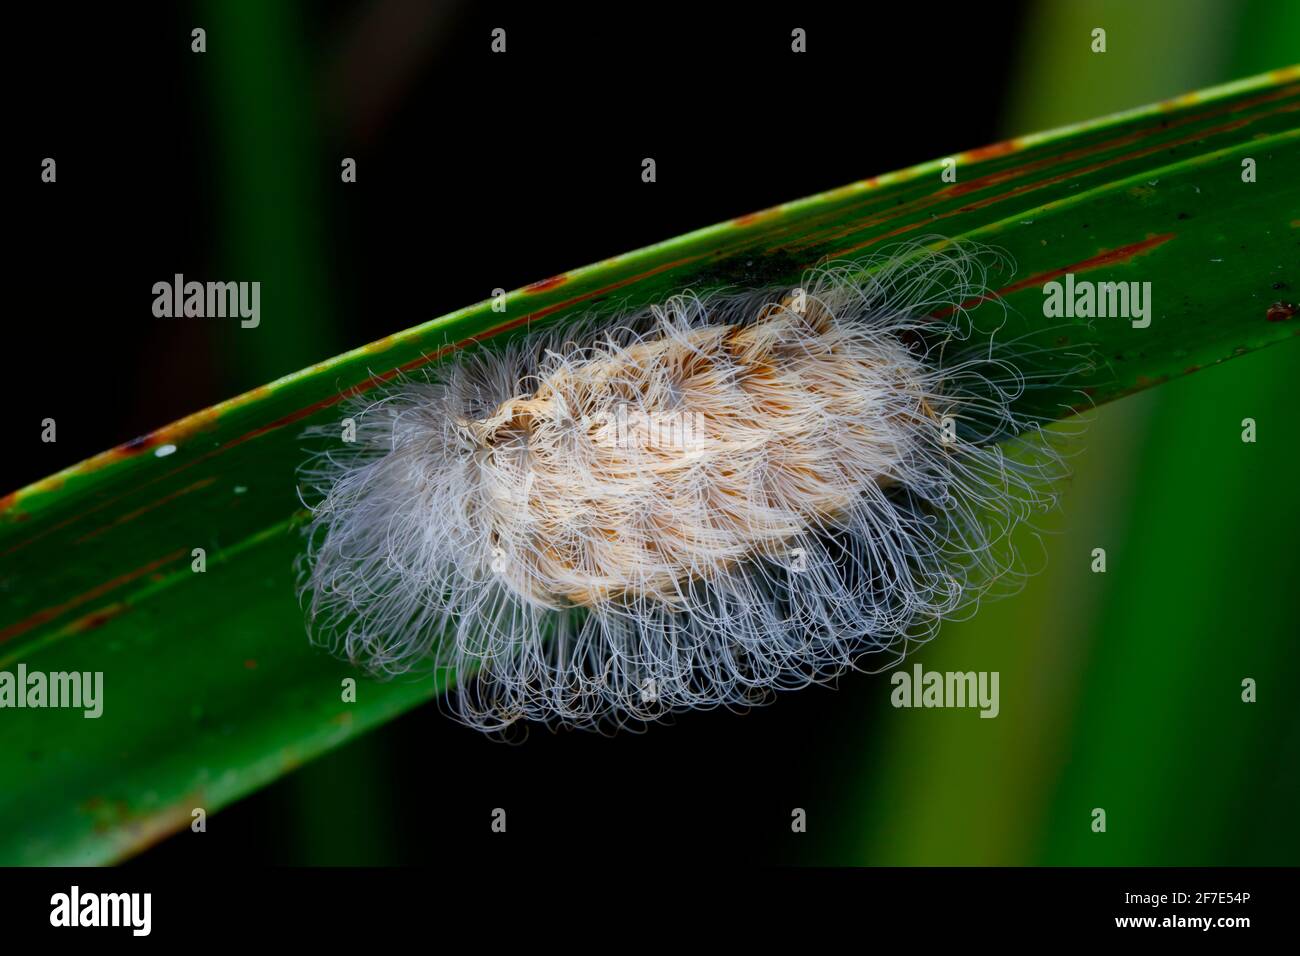 A southern flannel moth caterpillar, Megalopyge opercularis, crawling on a leaf. Stock Photo